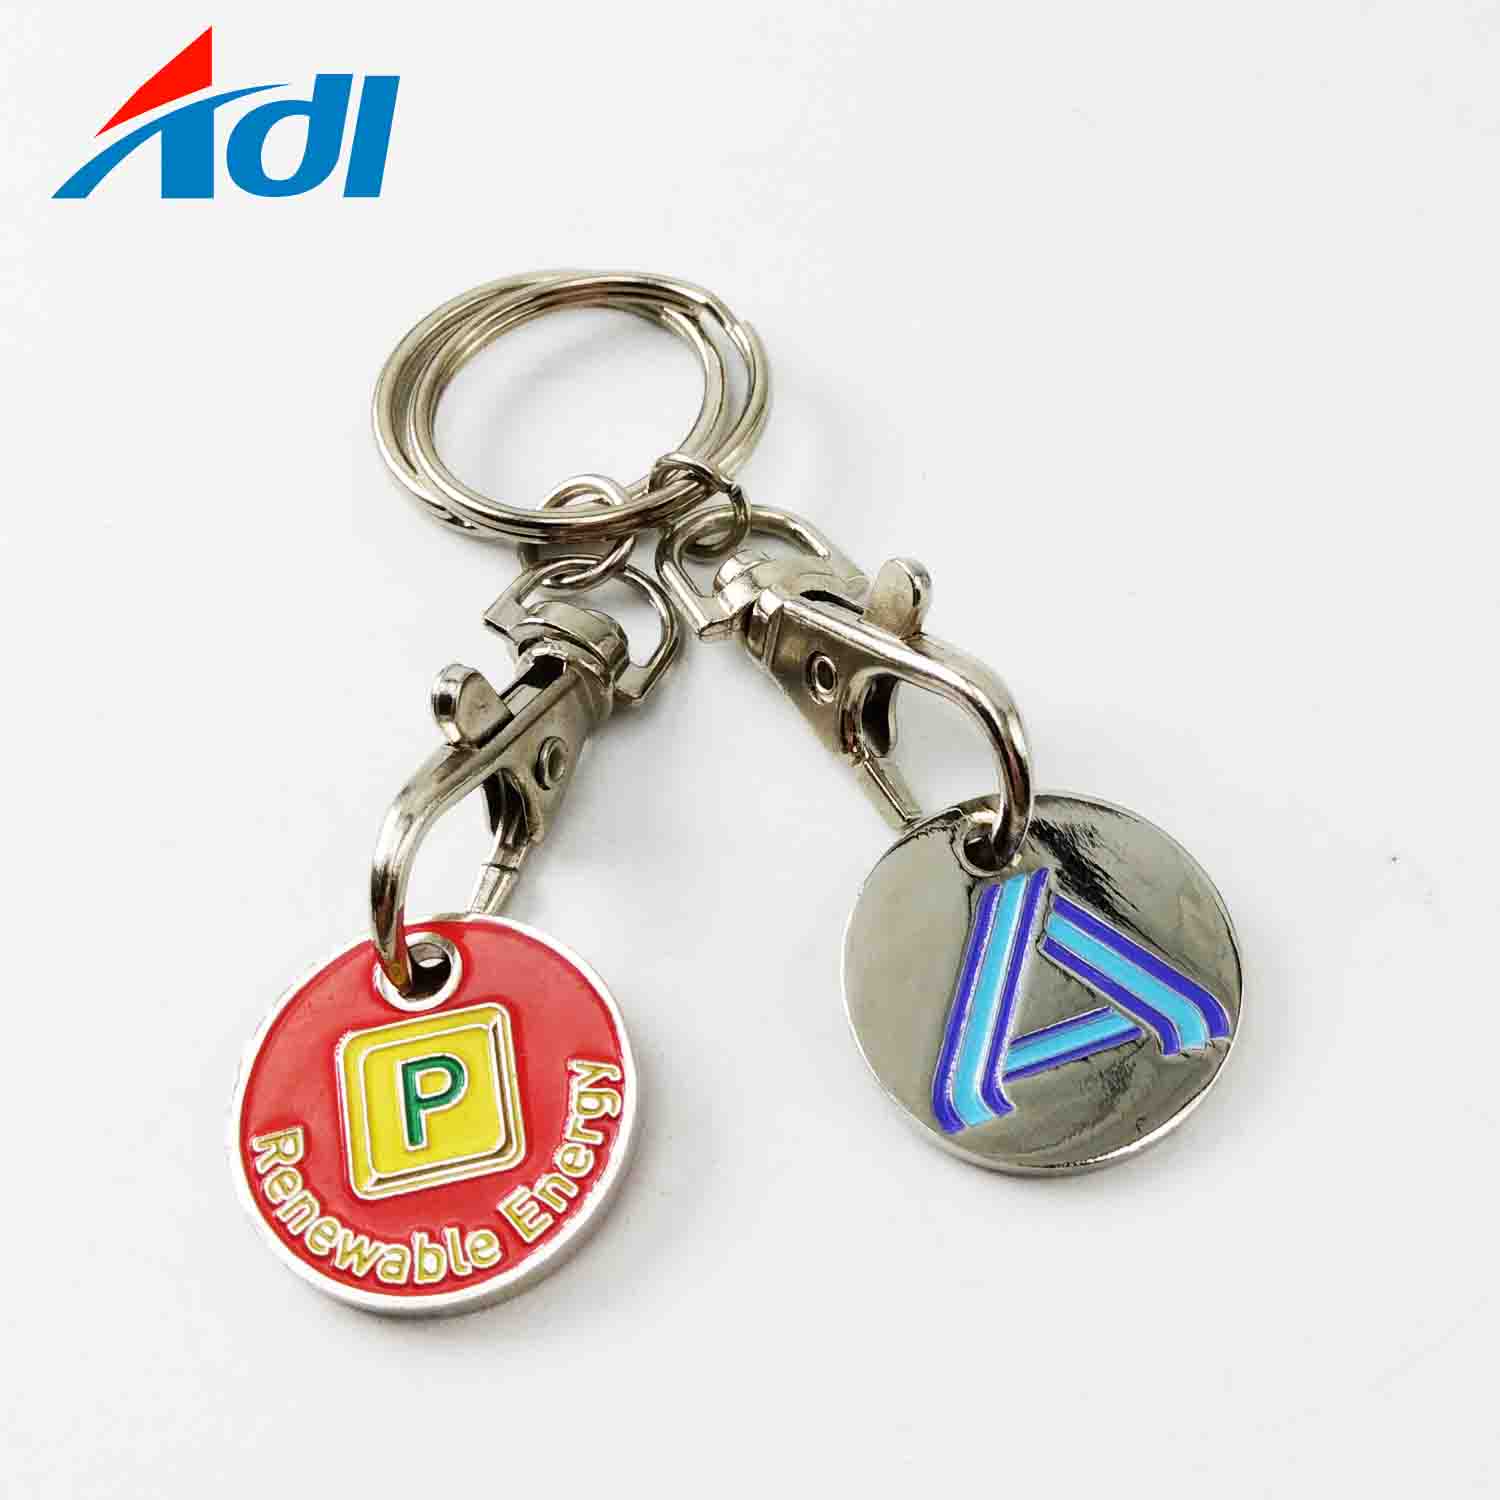 Metal Keychain Manufacturer The Metal Keychain with Logo 